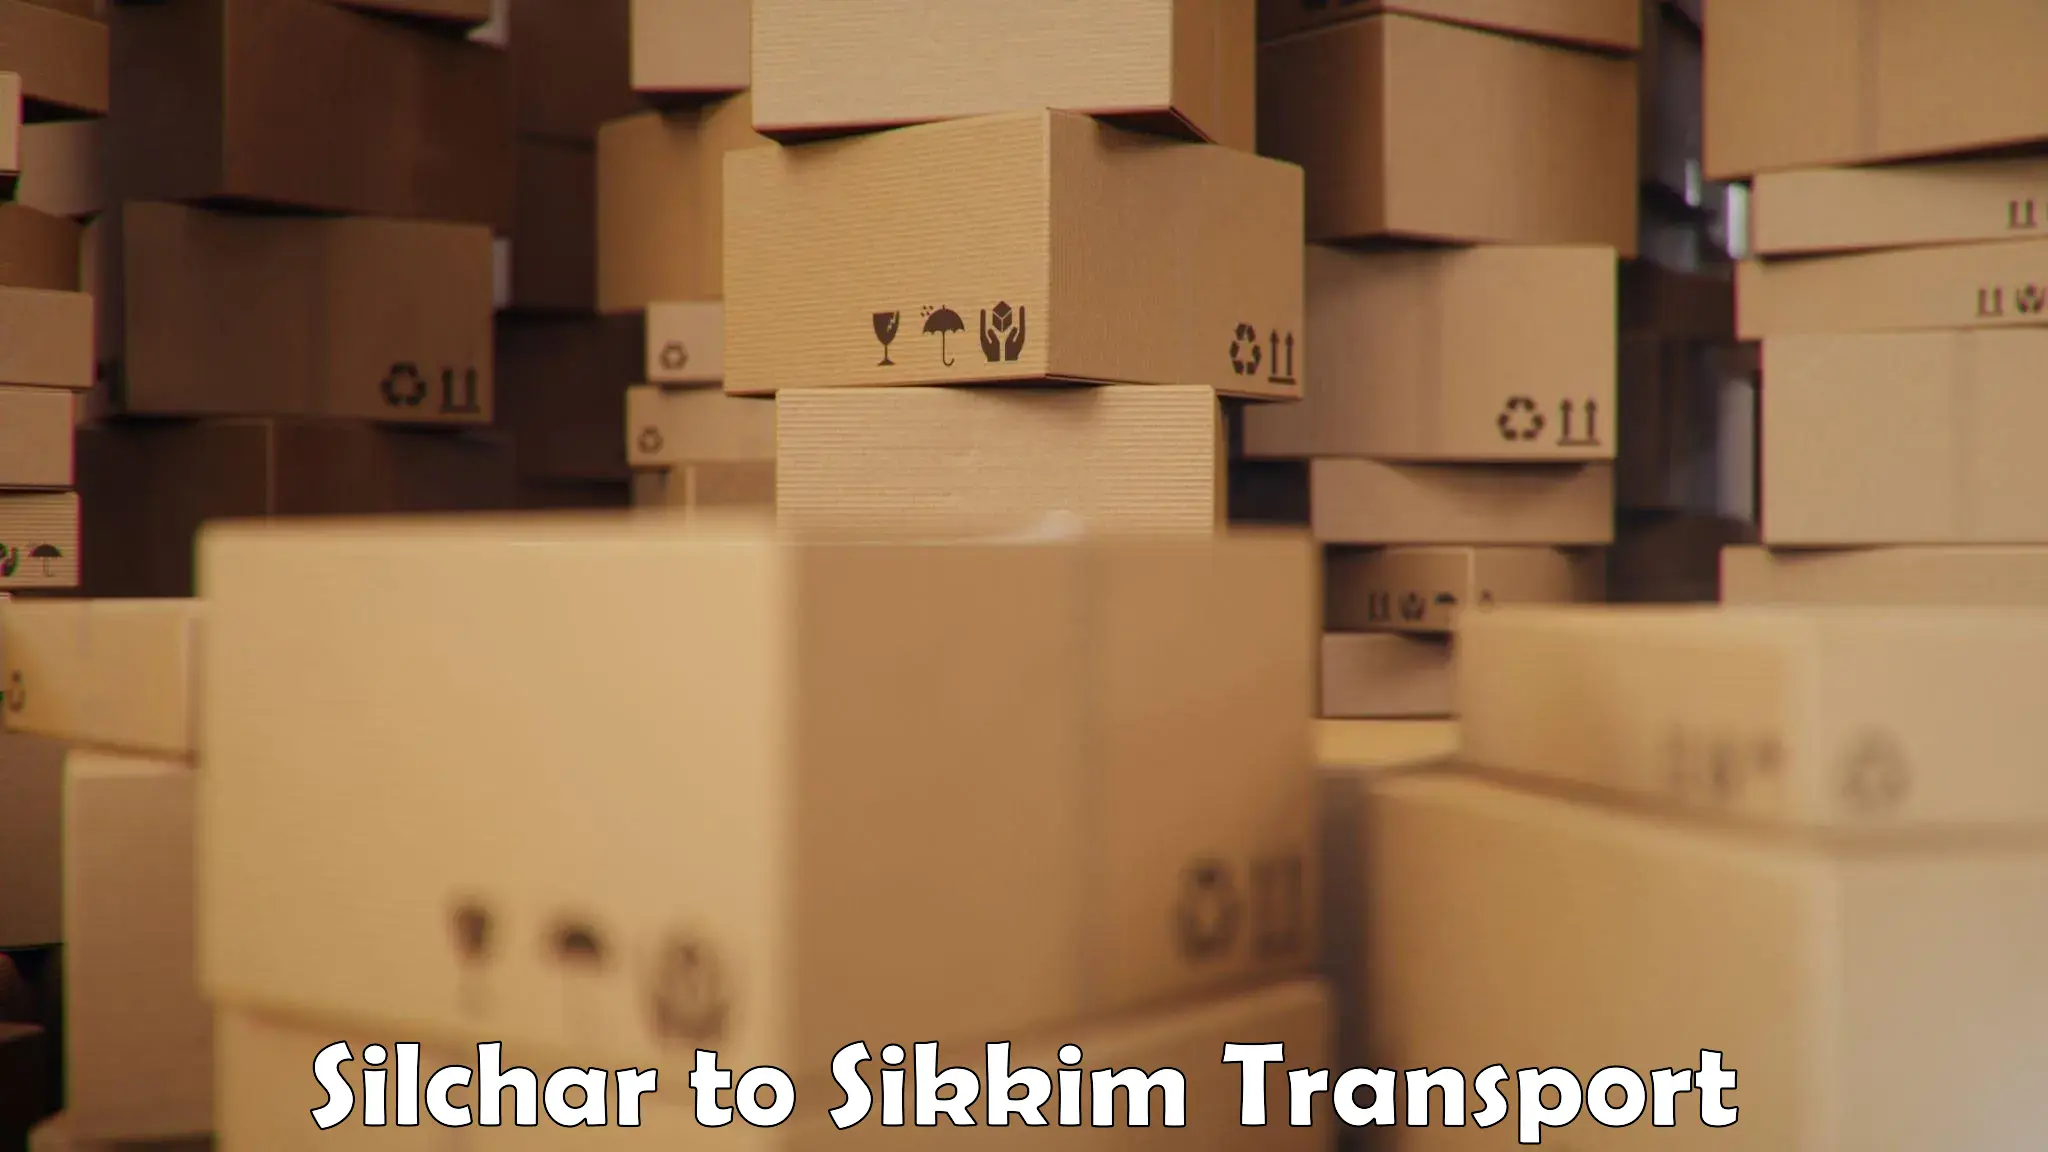 Air freight transport services Silchar to Jorethang